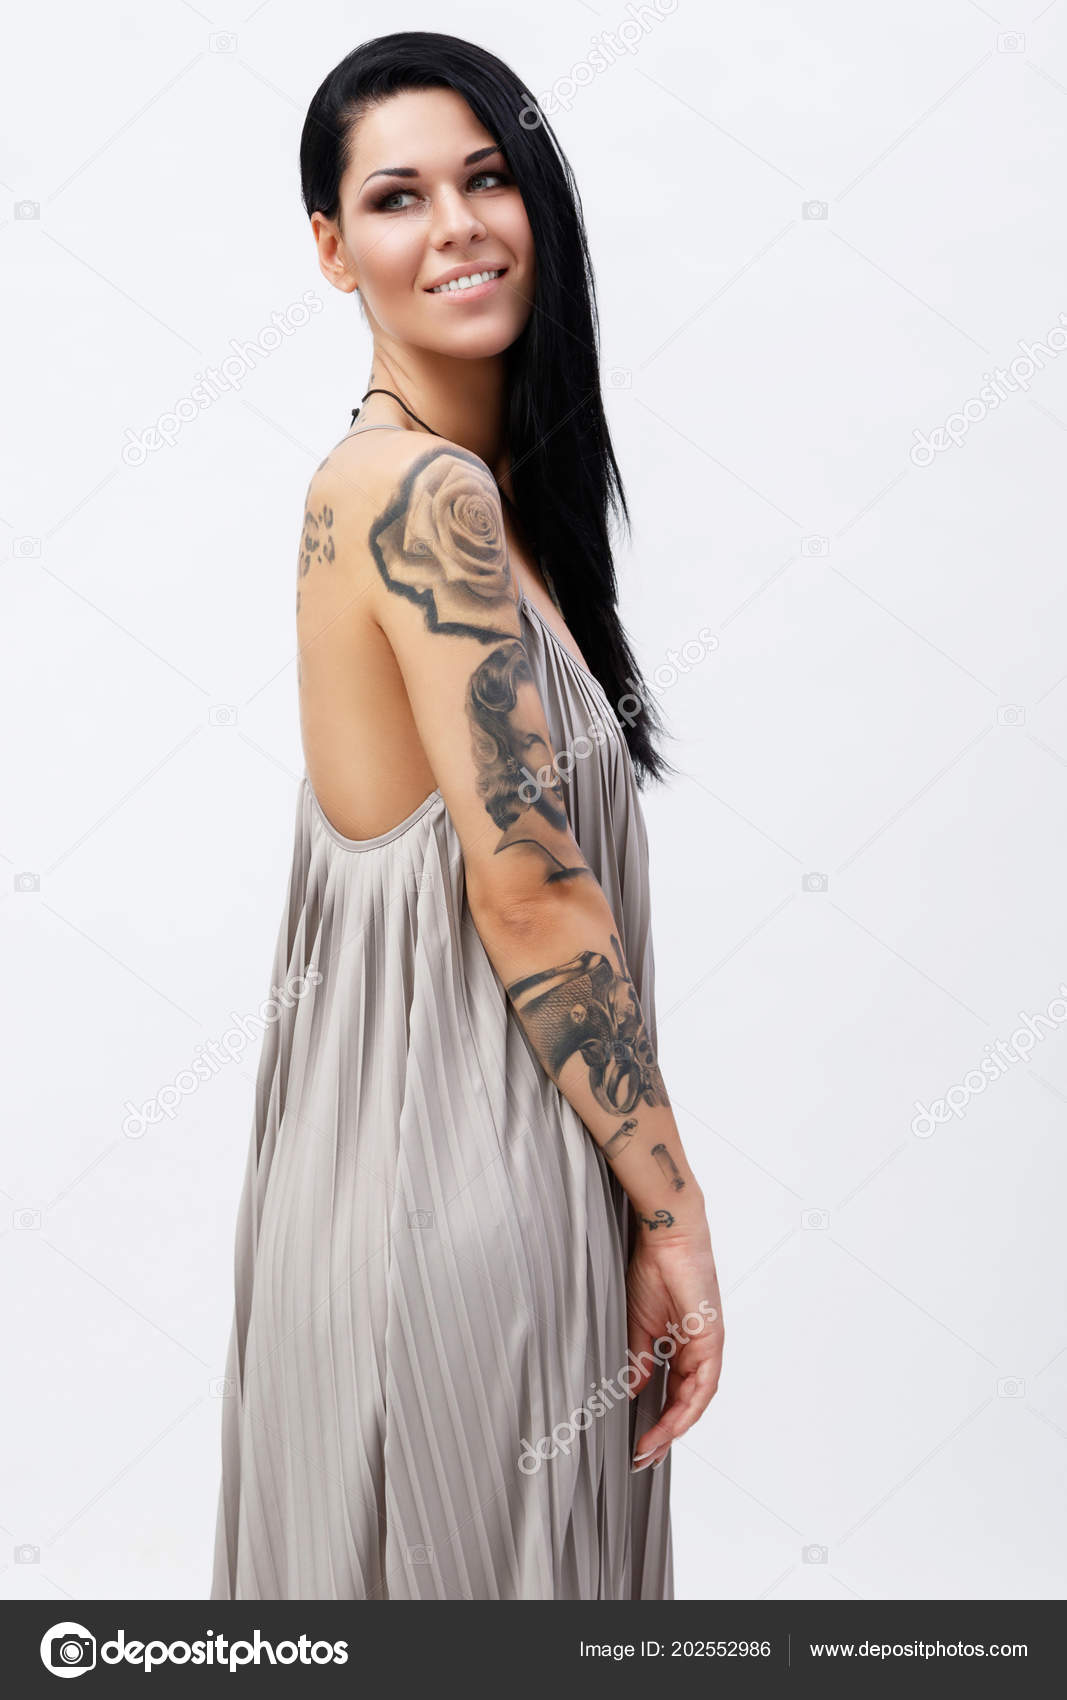 Women tattoo Stock Images  Search Stock Images on Everypixel